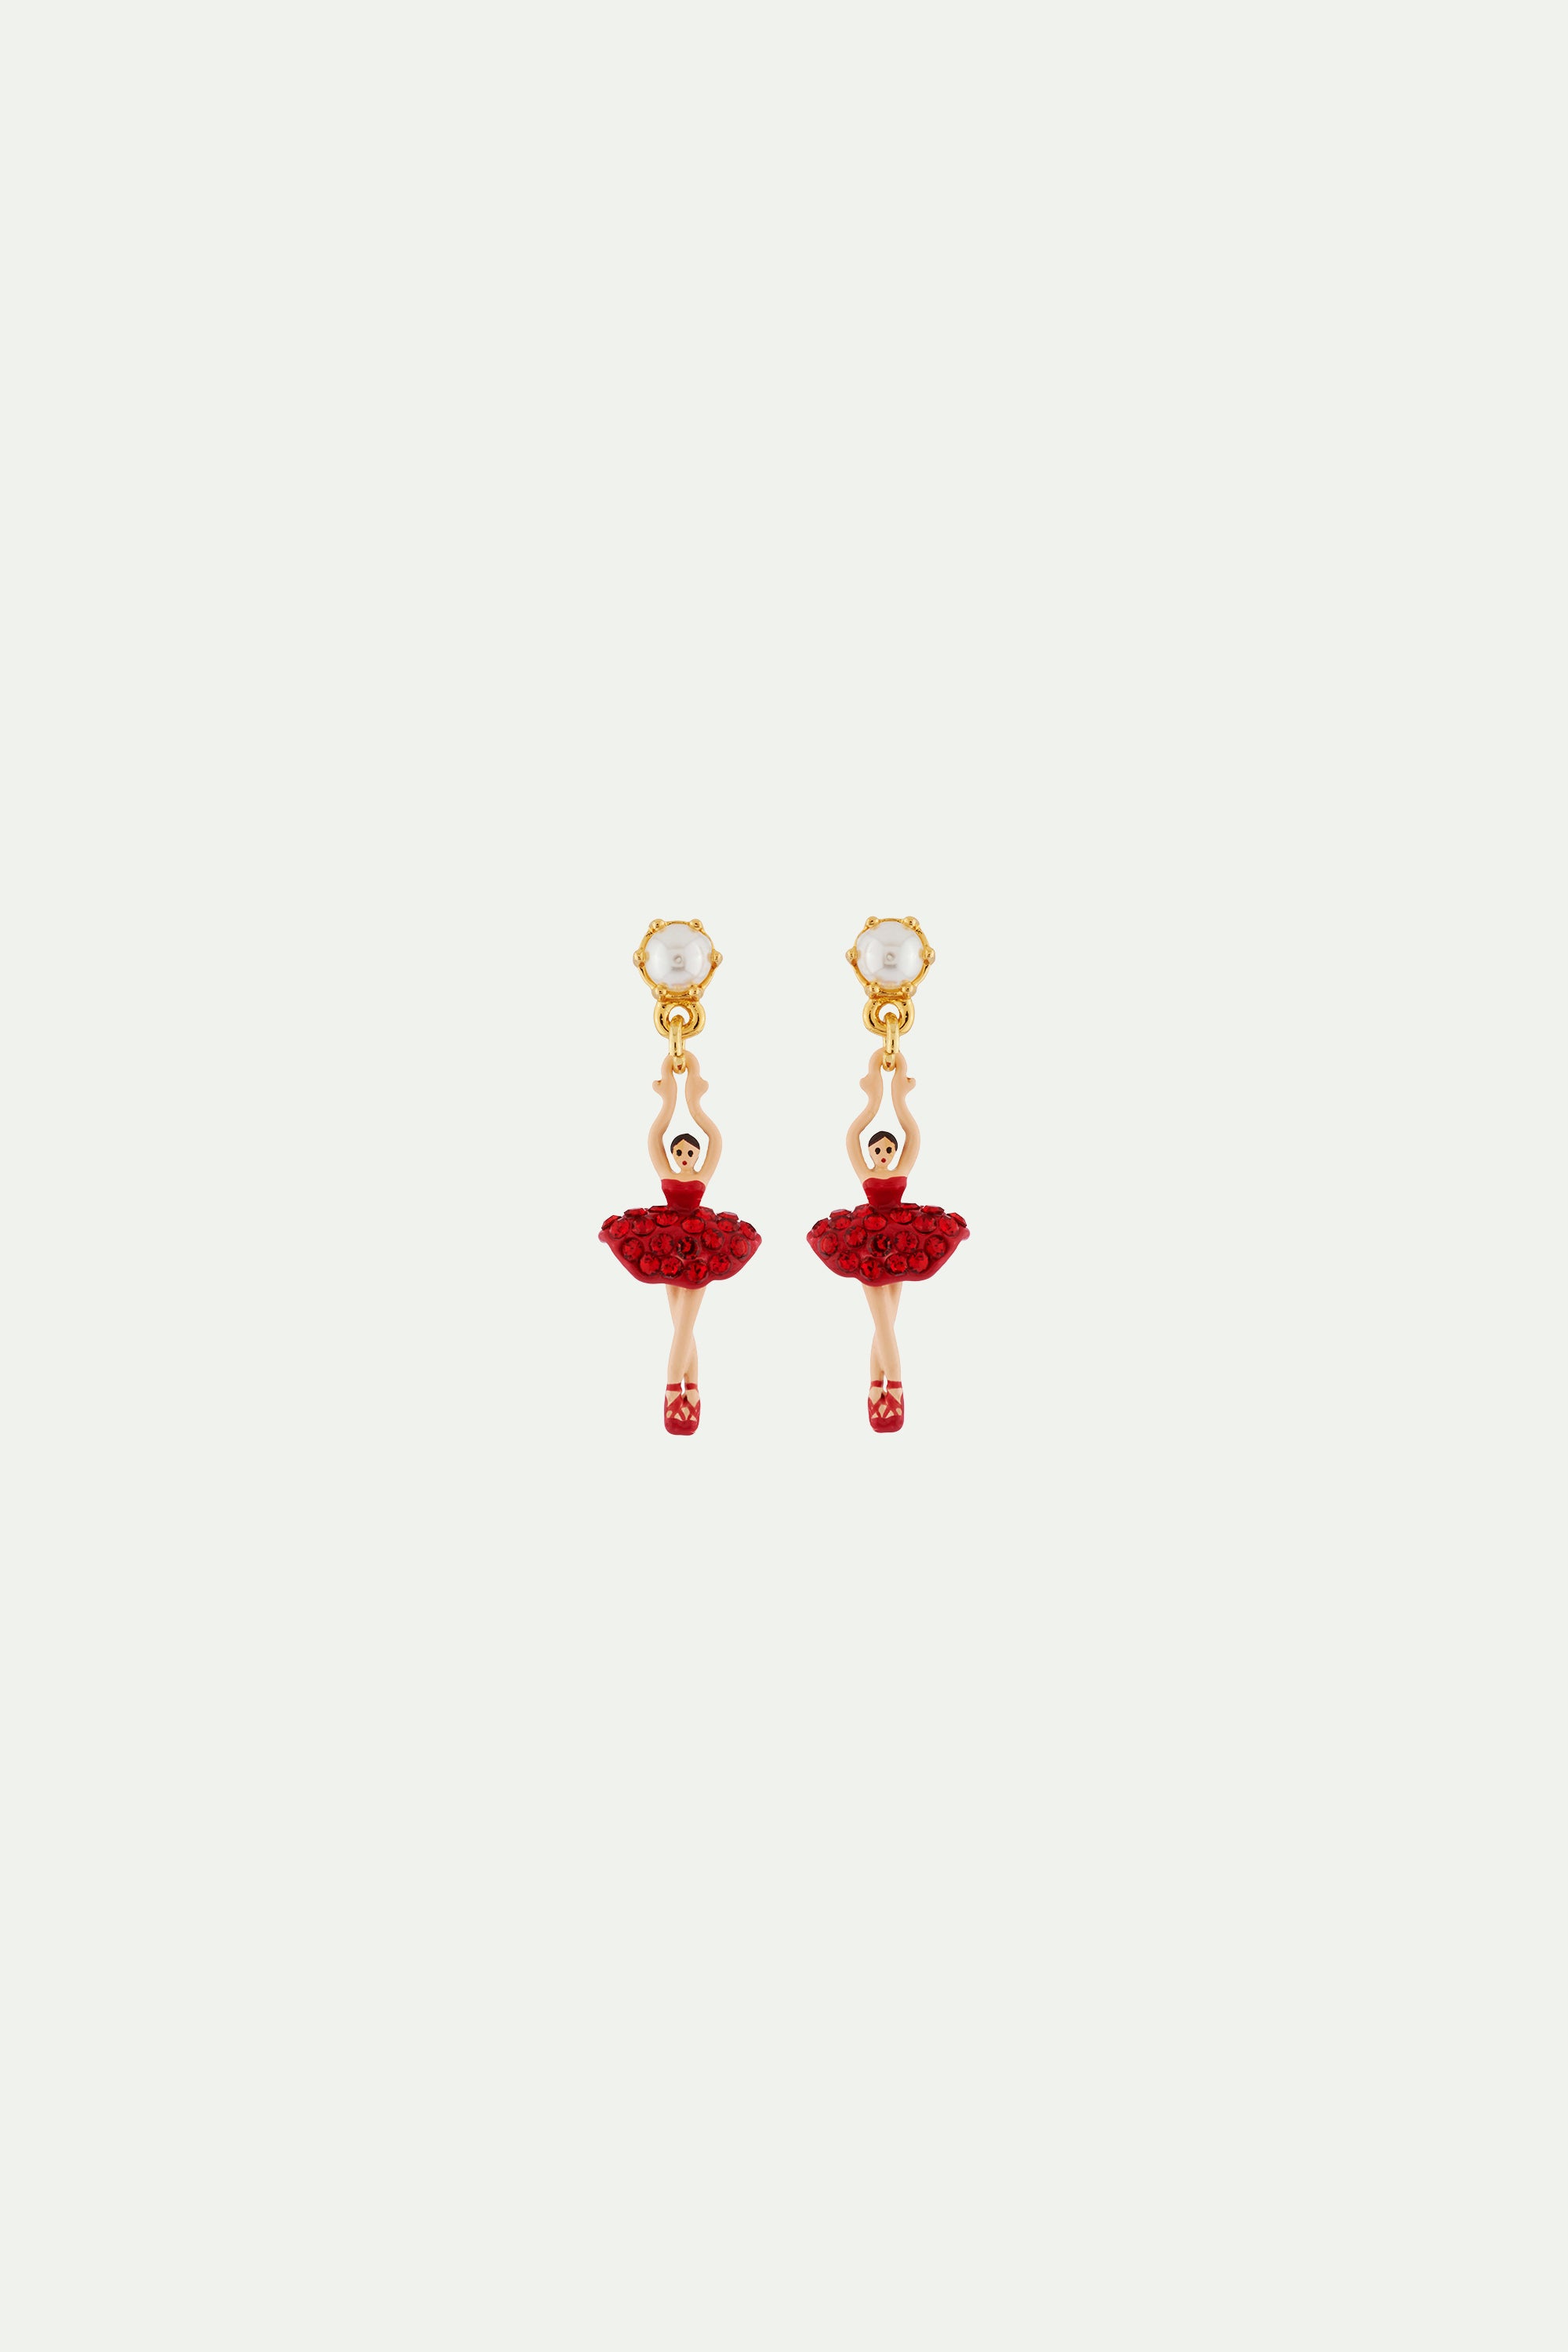 Clip on earrings mini-ballerina wearing a tutu paved with red rhinestones